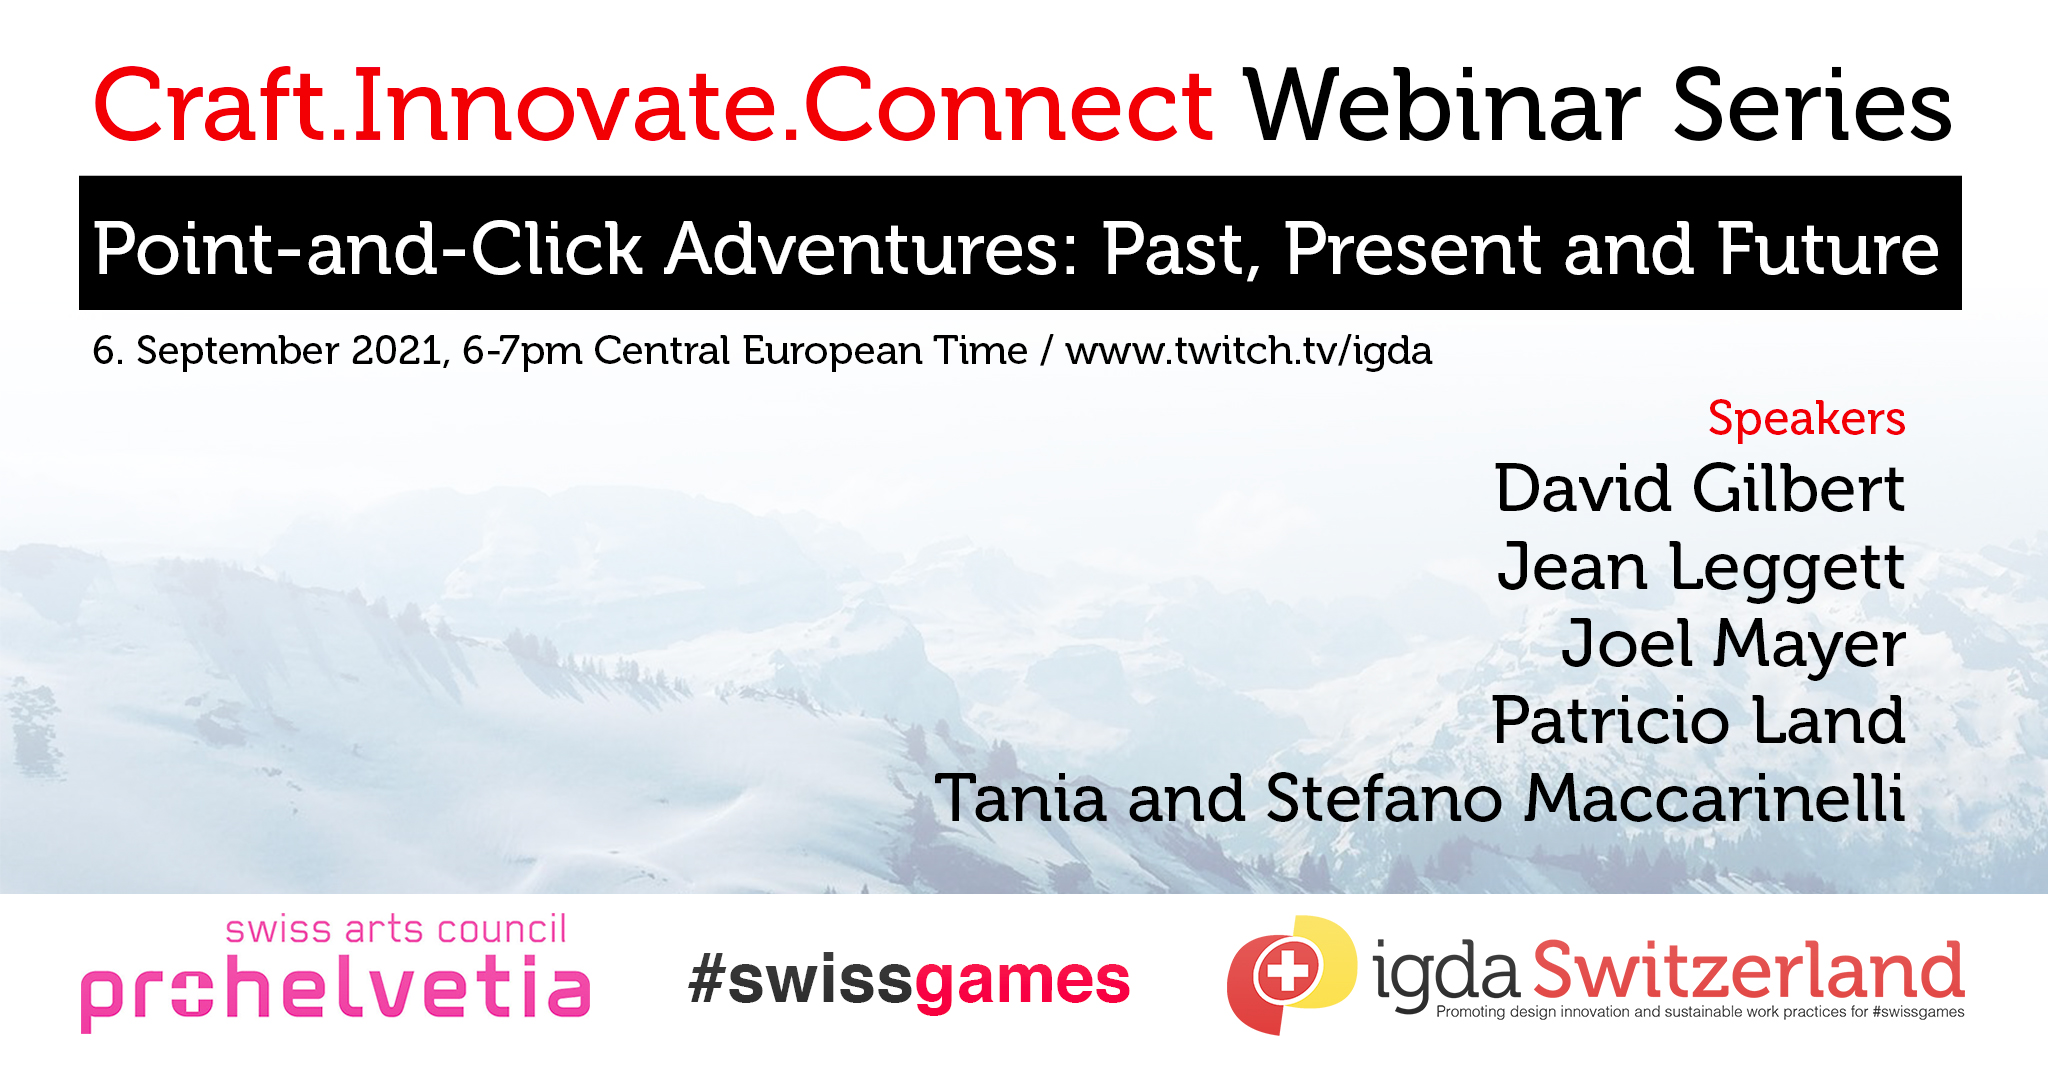 Fig 1. Point and Click Adventure Seminar from IGDA Switzerland